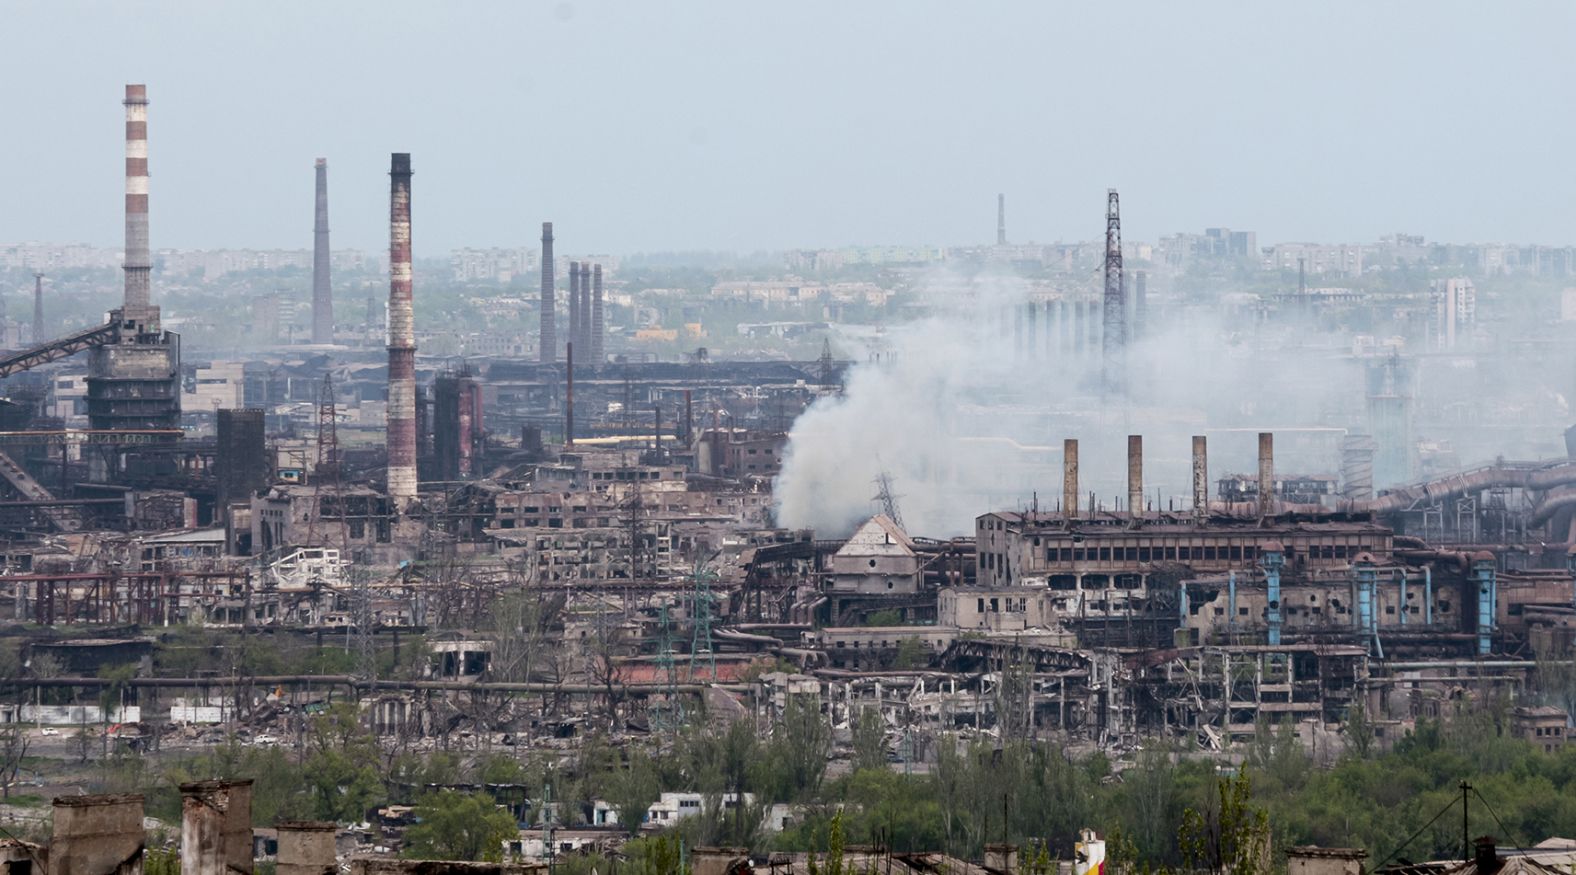 Smoke rises from the Azovstal steel plant in Mariupol on May 5.